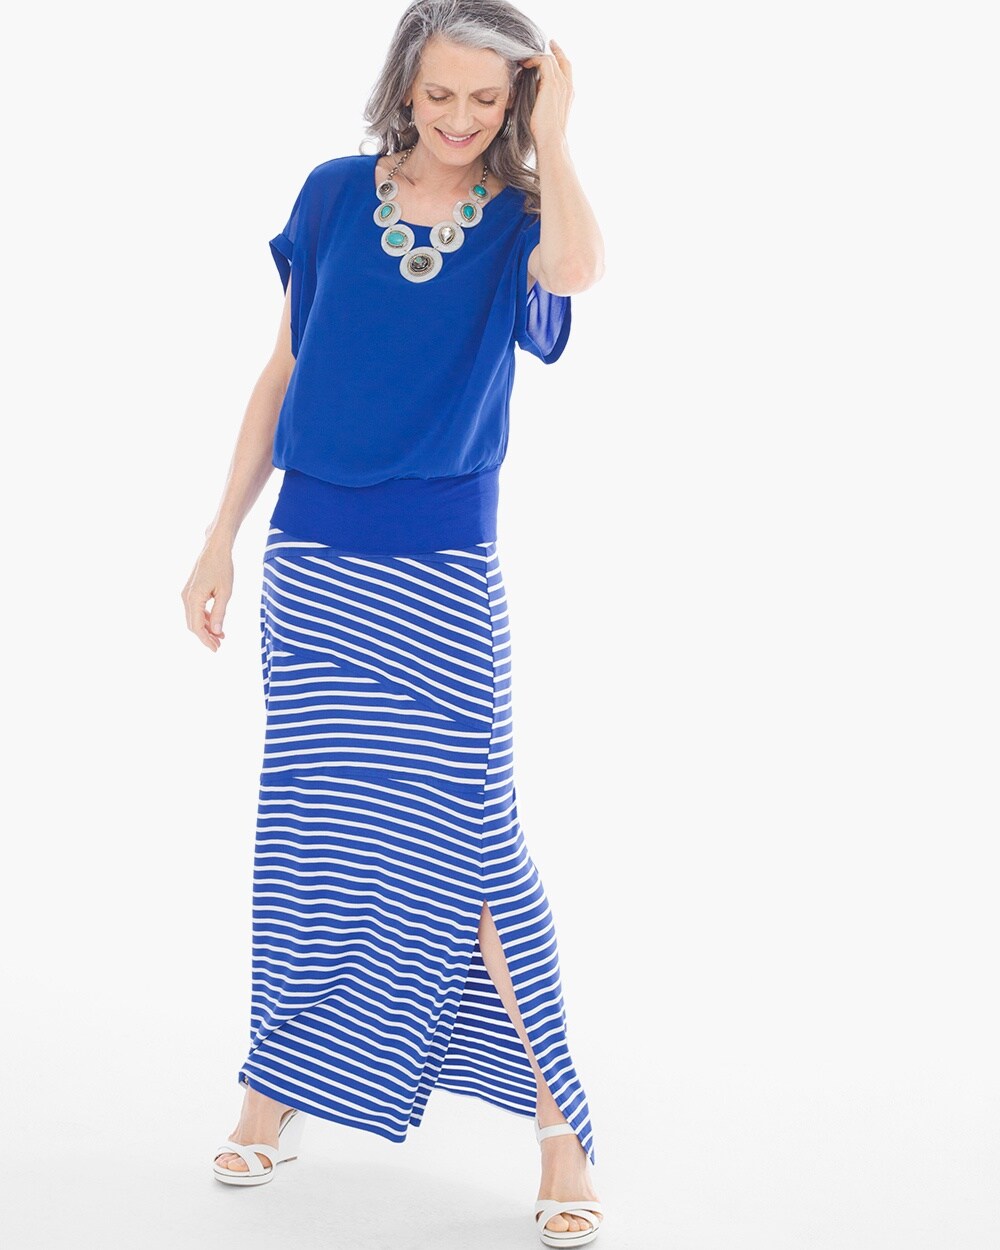 Blue And White Striped Skirt 105